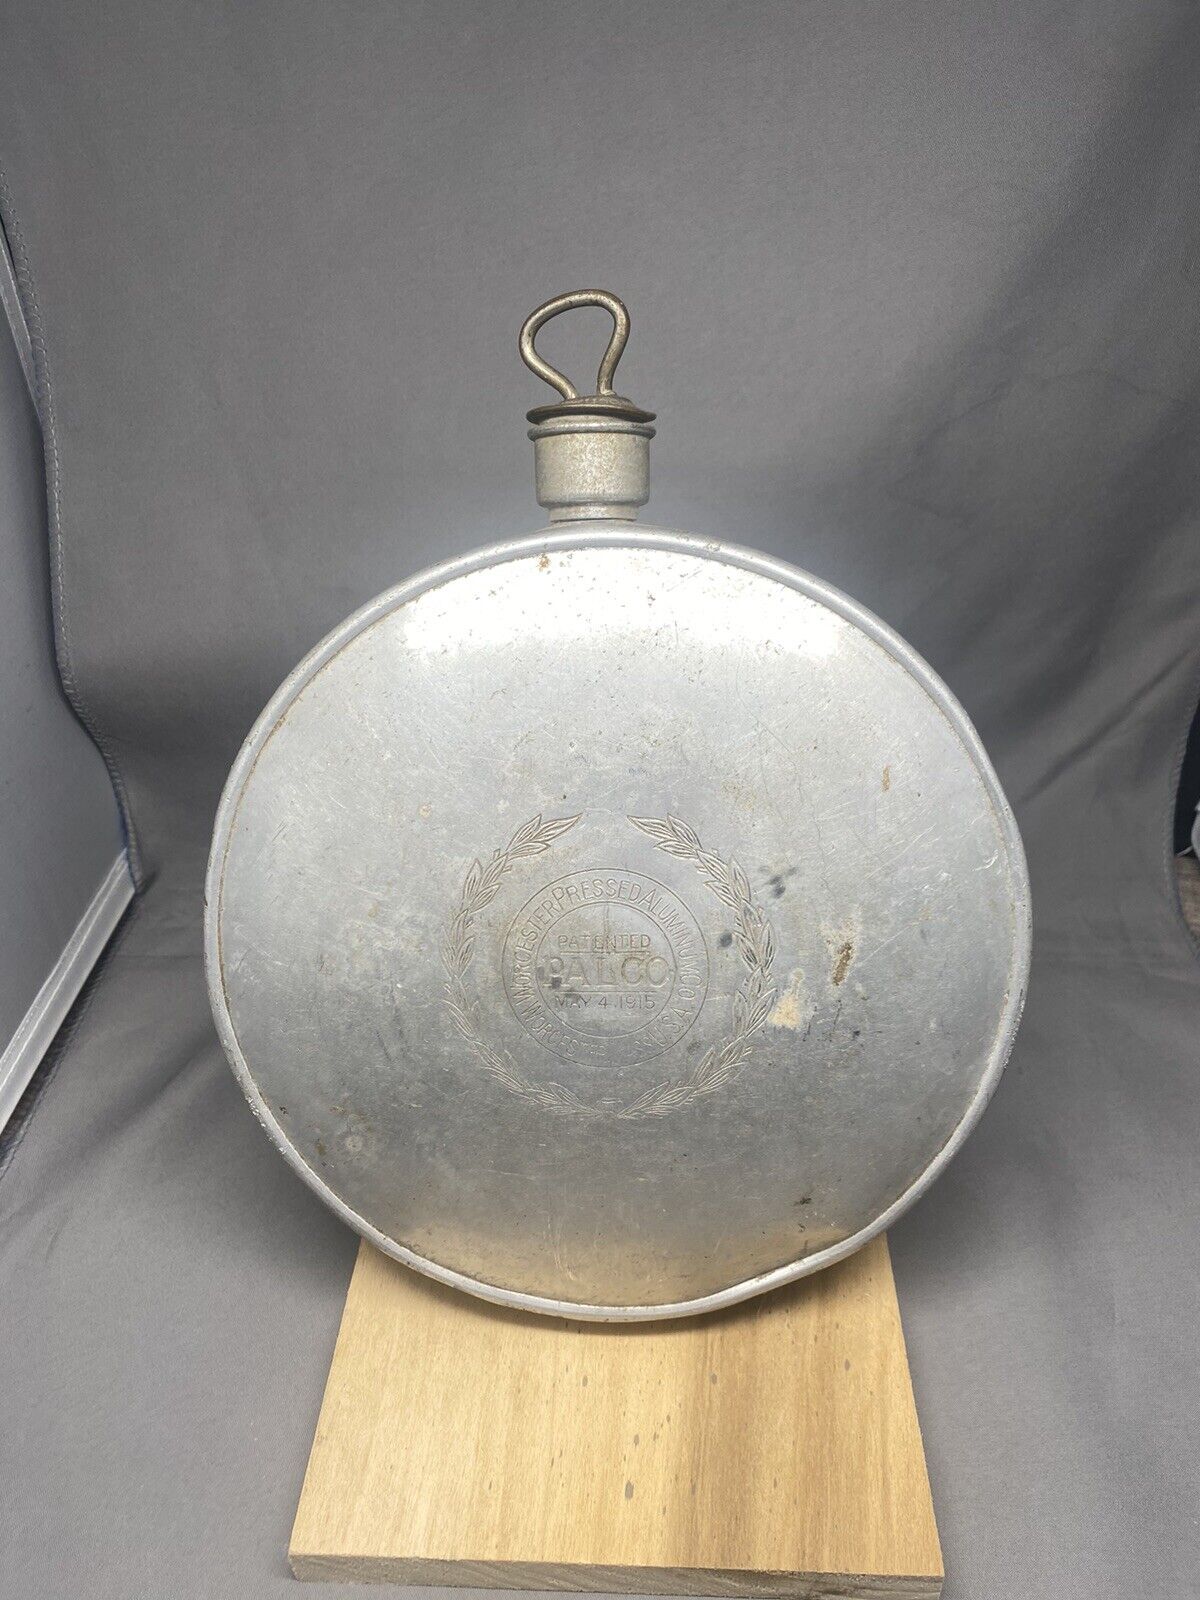 Vintage Palco Pressed Aluminum Canteen. Worcester, Mass. USA, Pat\'d May 4, 1915